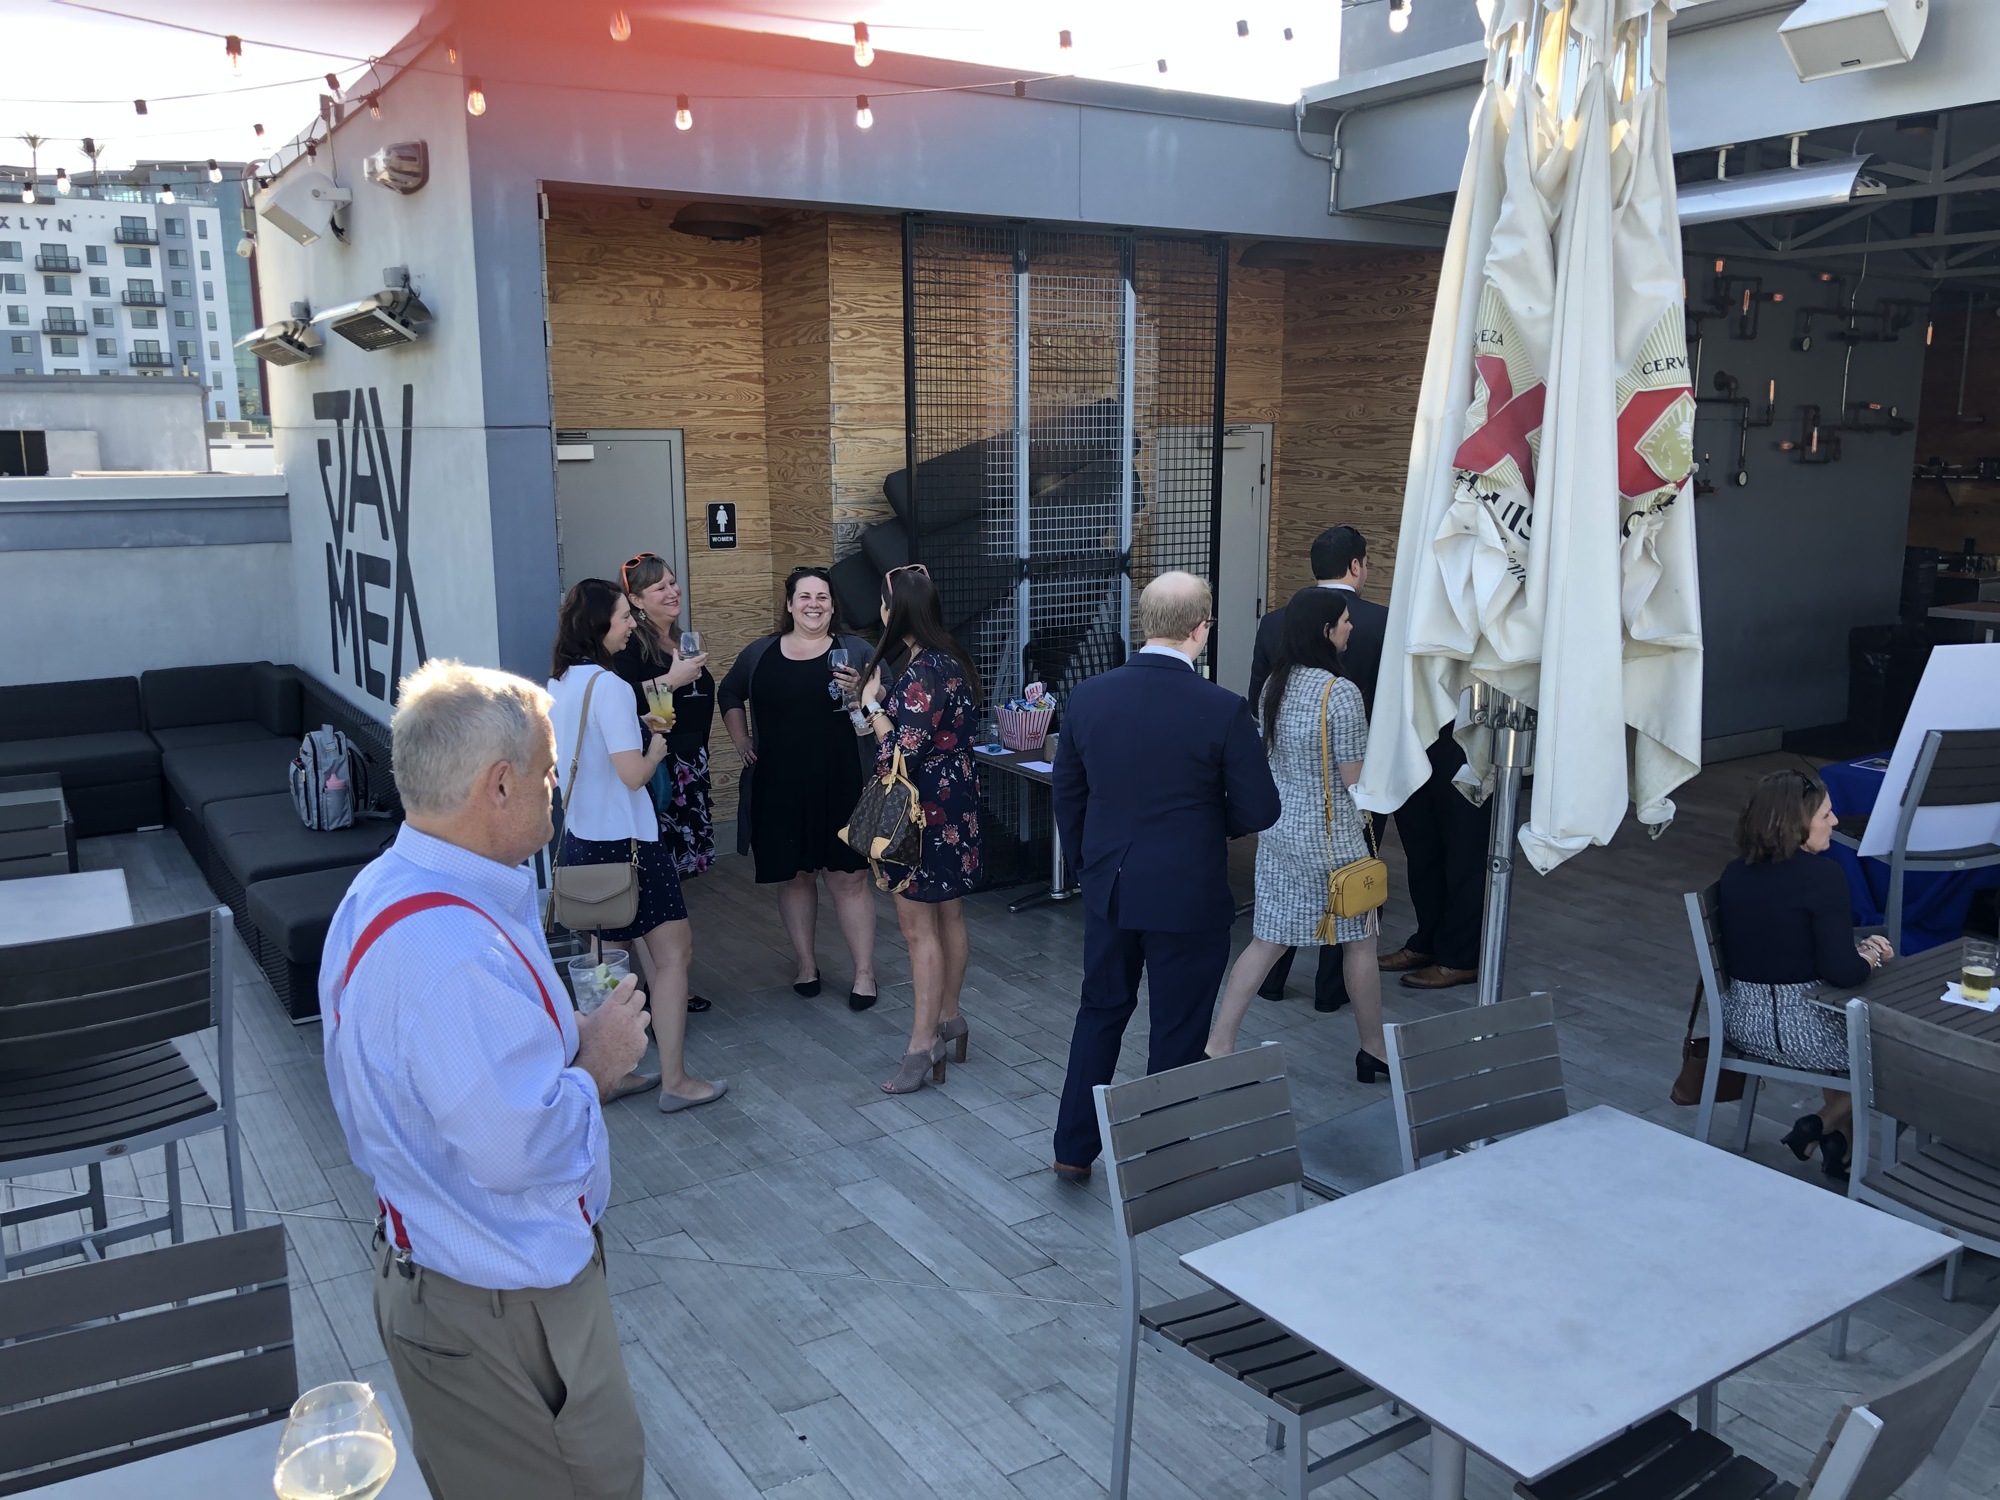 The annual Rendezvous on the Rooftop at Burrito Gallery Brooklyn raised more than $1,130 for the nonprofit Dreams Come True.